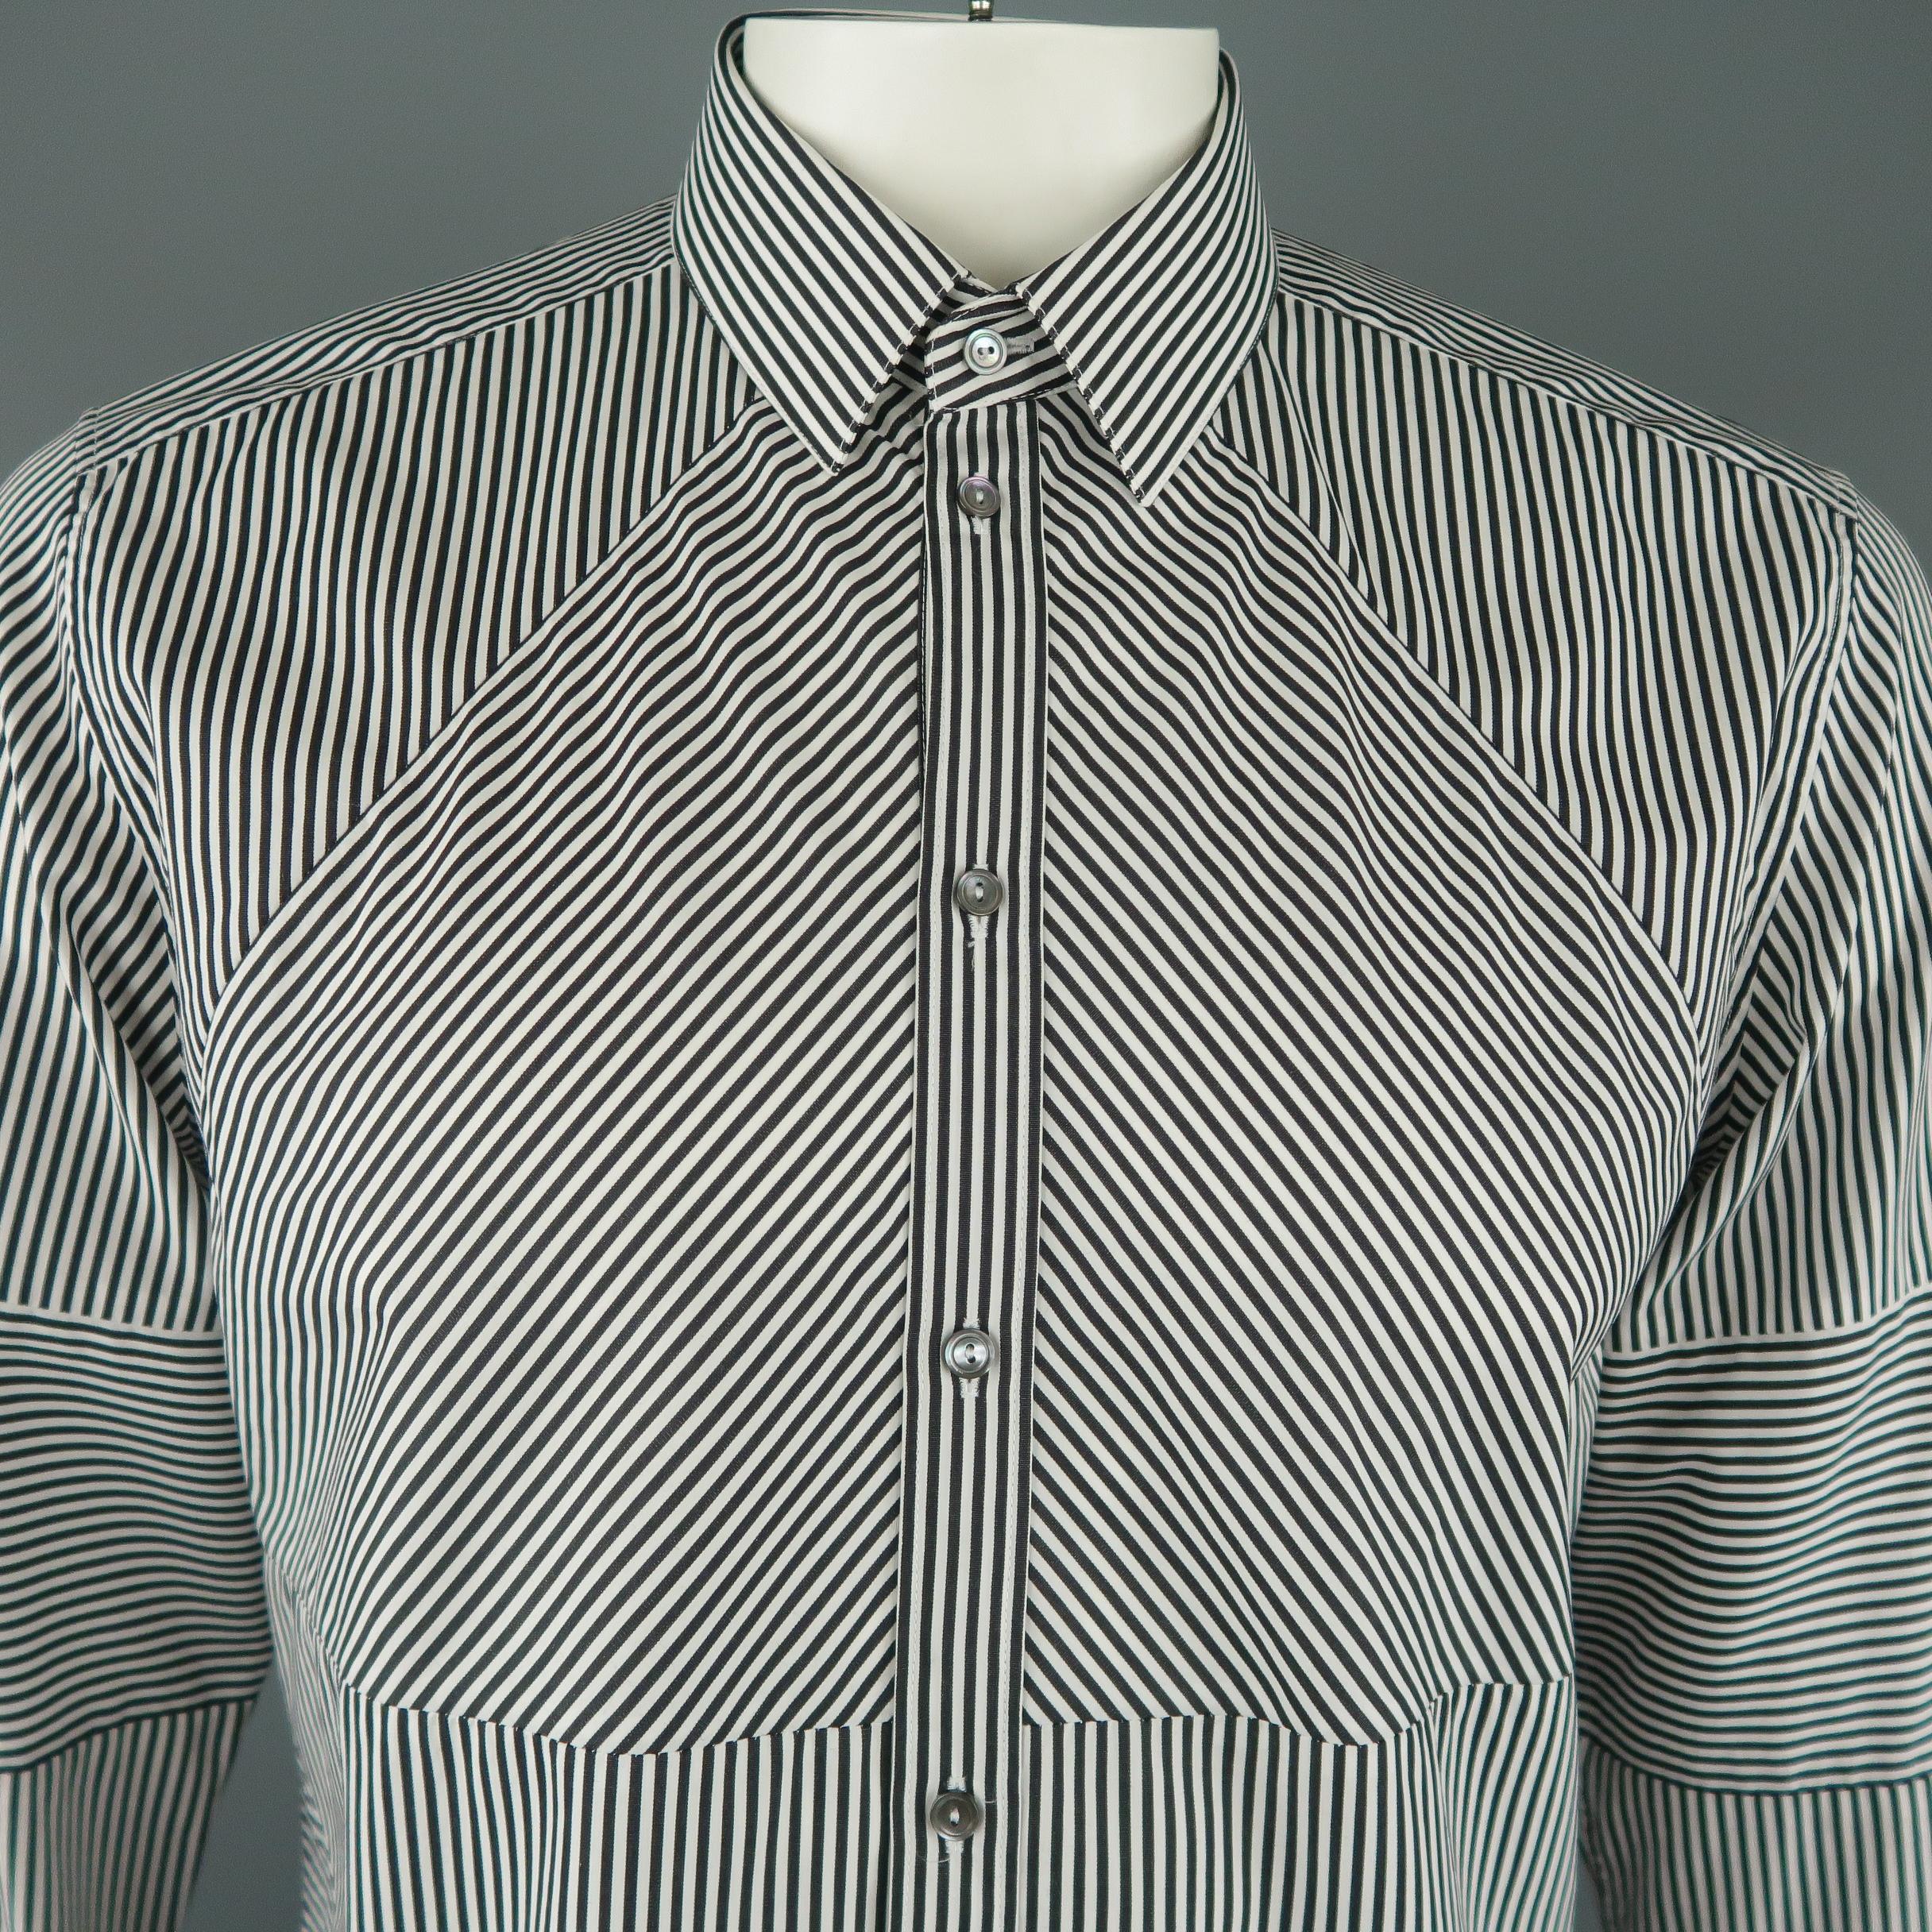 DOLCE & GABBANA dress shirts comes in directional black and white striped patchwork panels with a classic pointed collar. Made in Italy.
 
Excellent Pre-Owned Condition.
Marked: 16 1/2  /  42
 
Measurements:
 
Shoulder: 18 in.
Chest: 44 in.
Sleeve: